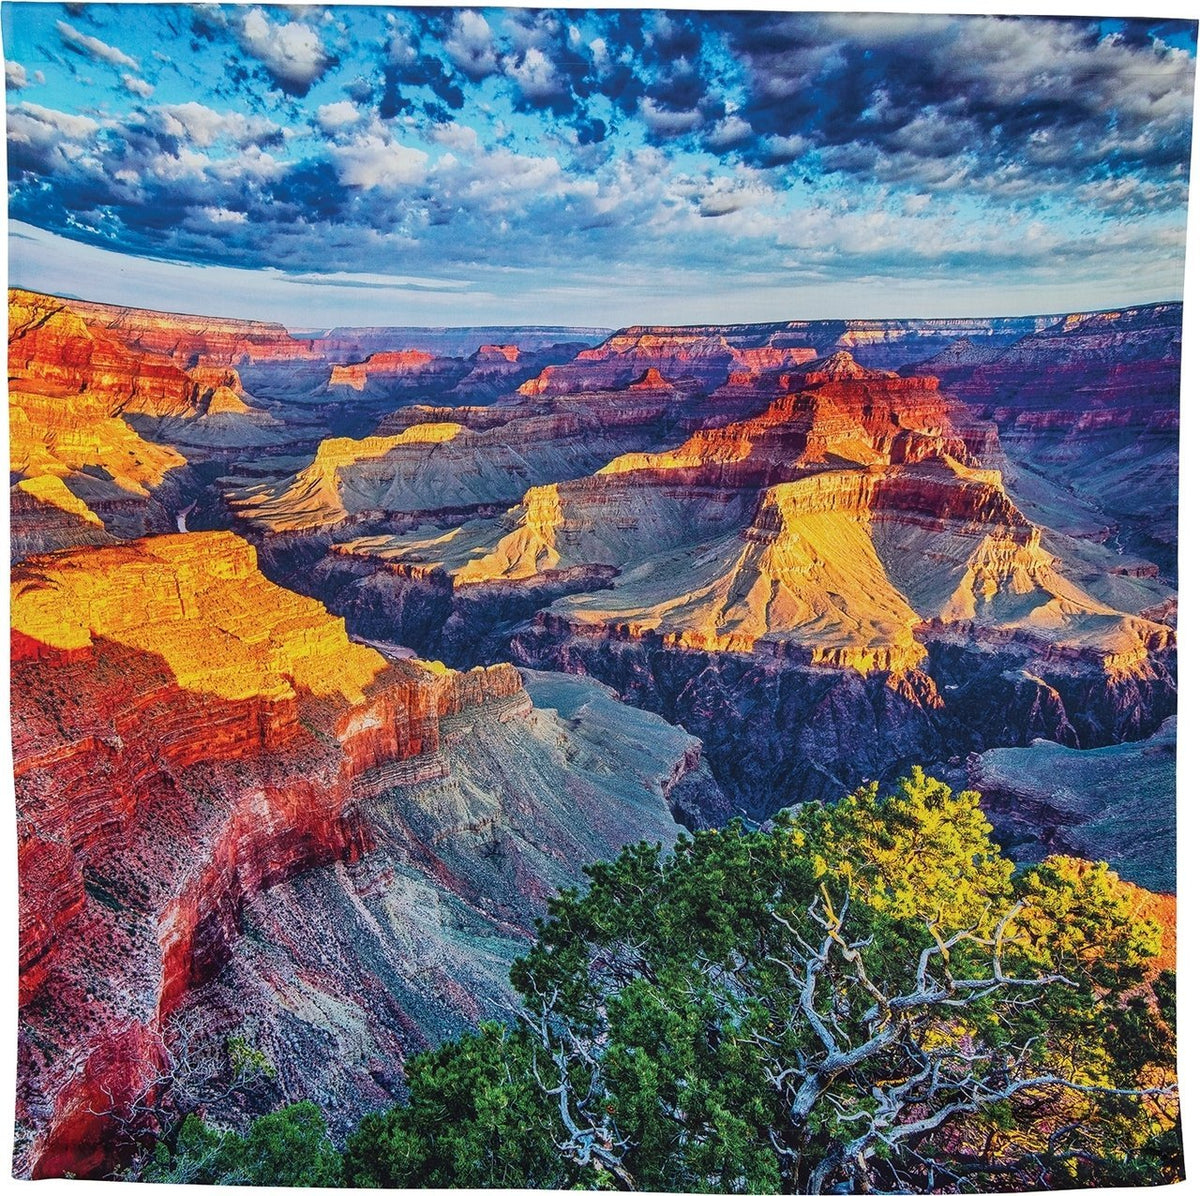 BLOWOUT (20 PACK) Grand Canyon Sunset Photo Tapestry and Hanging Wall Art (Extra Large, 4.8 x 4.8 Feet, 100% Cotton)